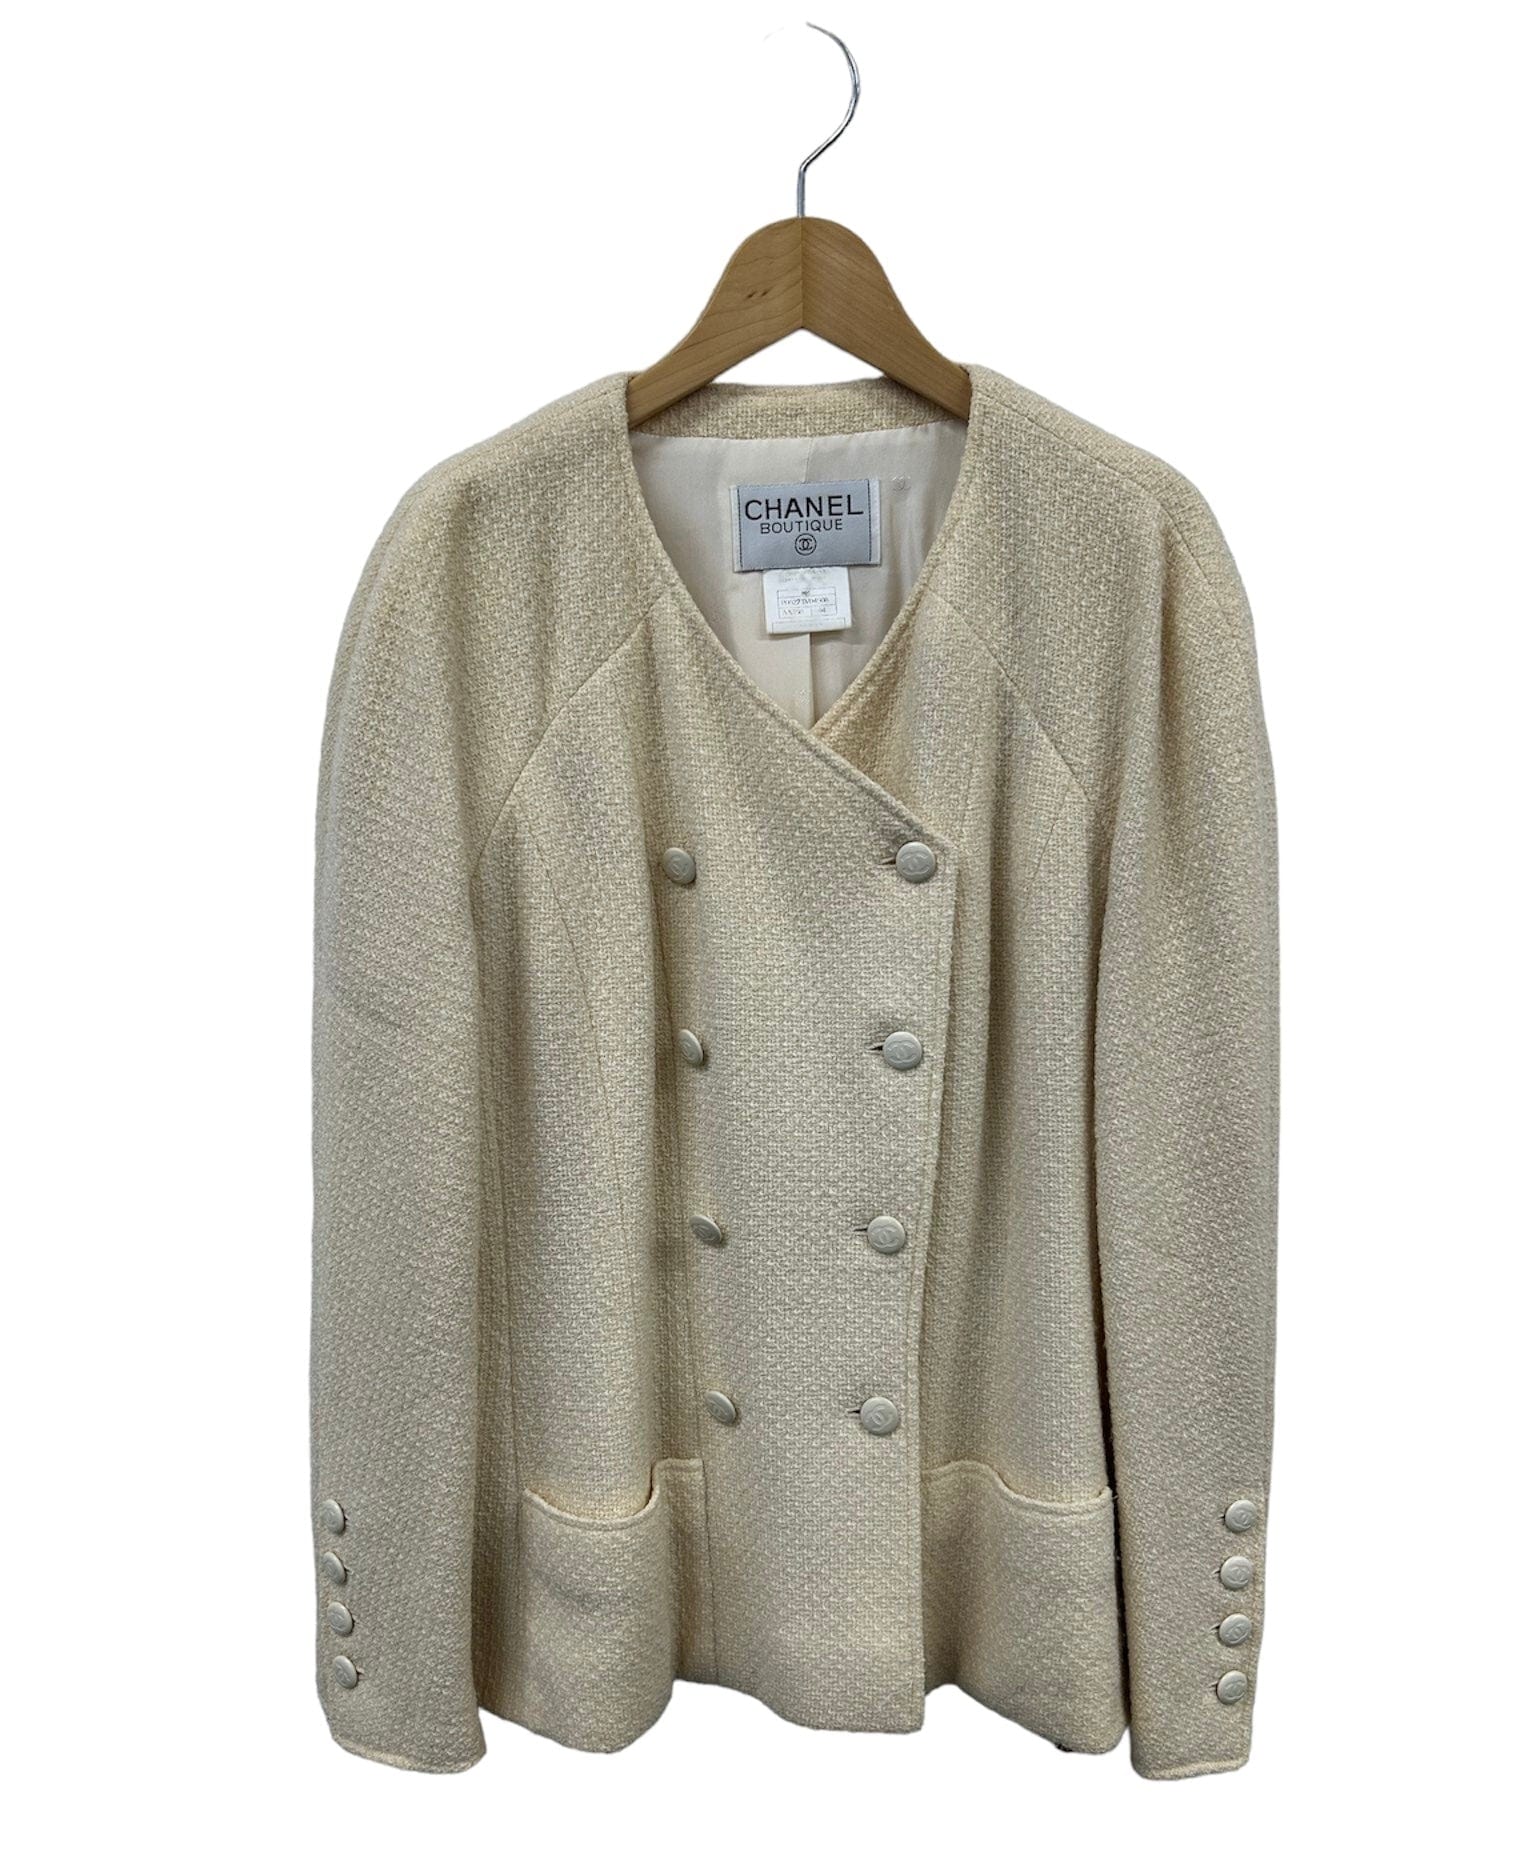 Chanel CC Buttons Collarless Jacket Cream #44 AVCSC1106